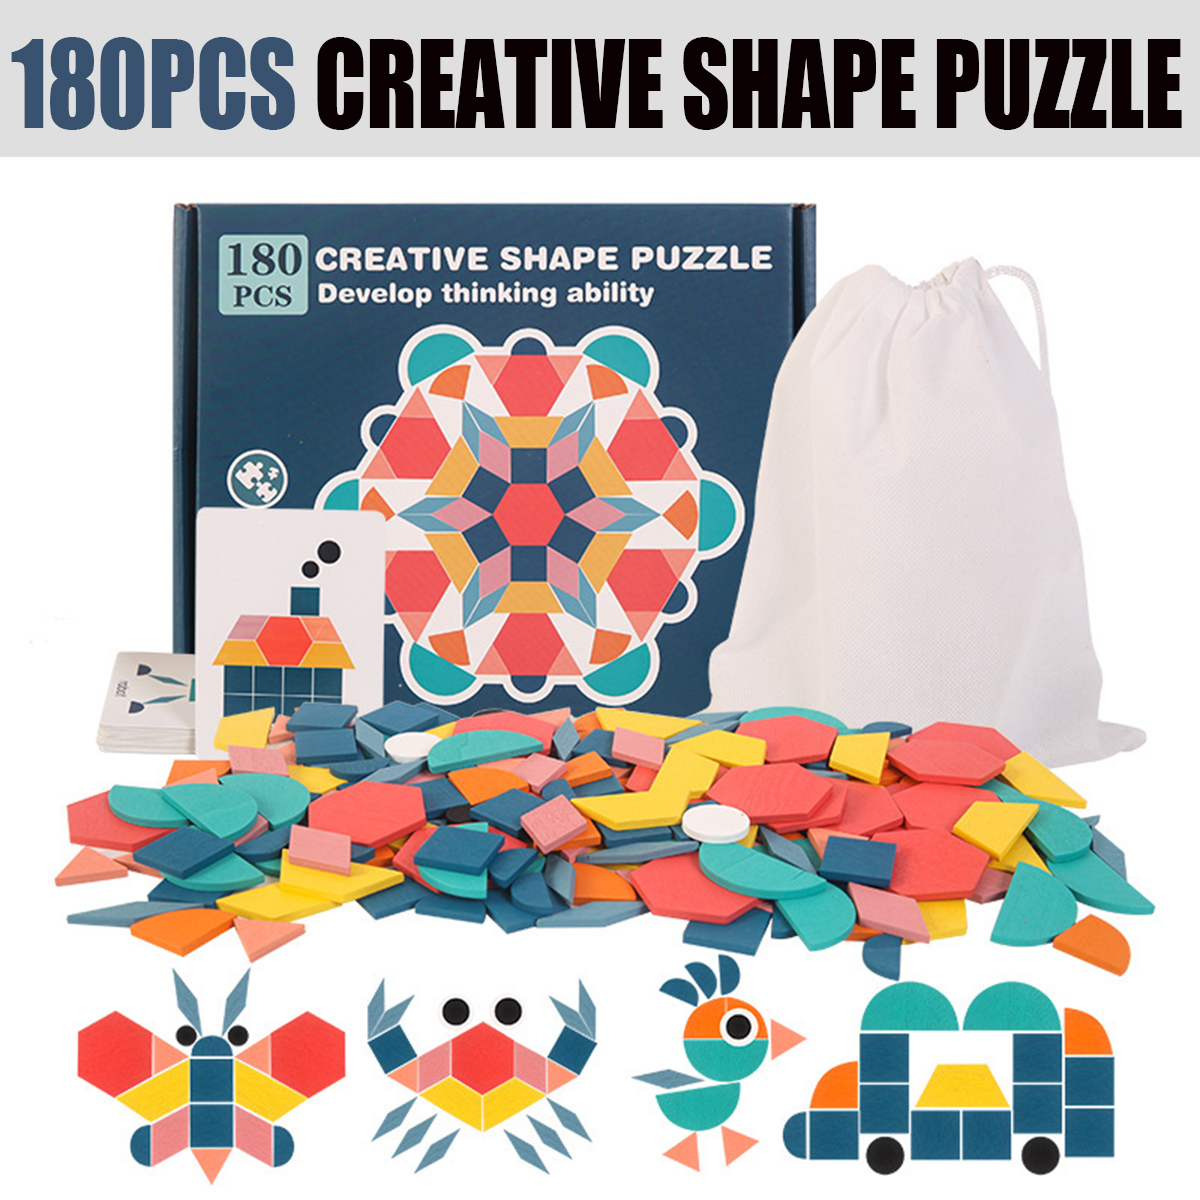 180-Pcs-Colorful-Creative-Multi-Shape-Puzzle-Develop-Thinking-Ability-Educational-Toy-with-Bag-for-K-1733532-1